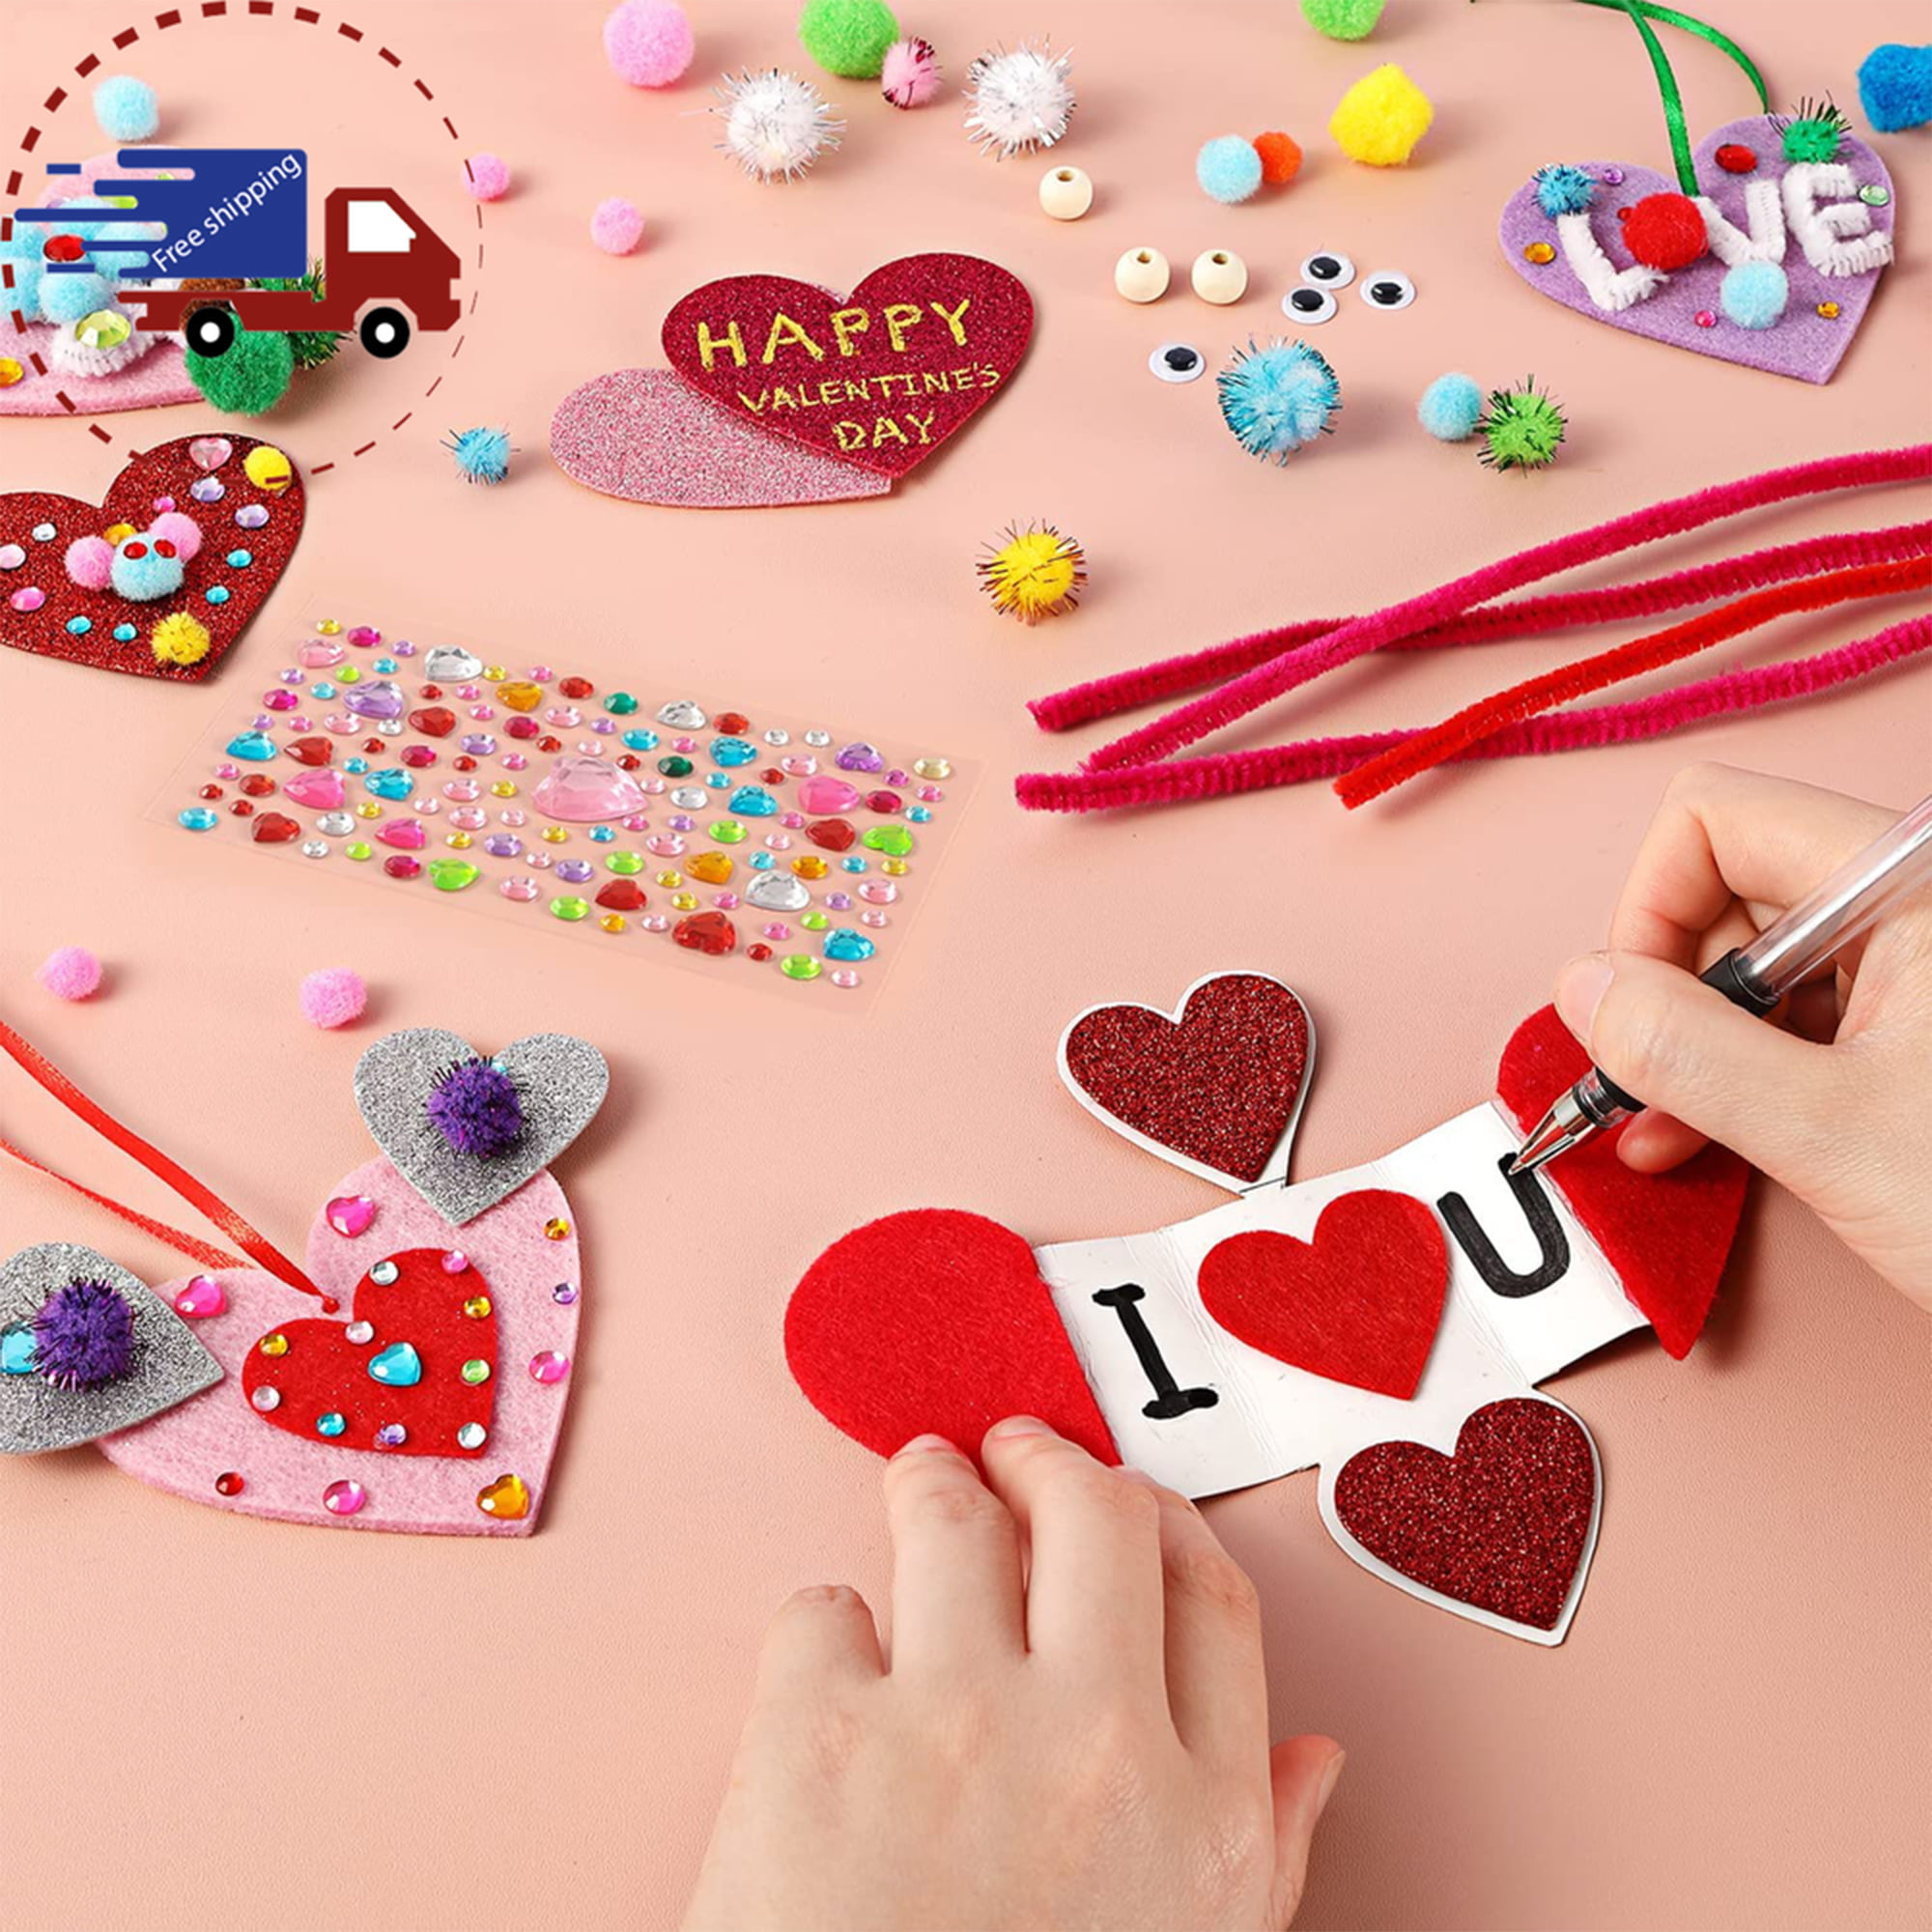  HOWAF 36 Sheets Valentine Heart Stickers for Kids, 400+ Happy  Valentines Day Stickers Love Decorative Sticker for Envelopes Cards Craft  Scrapbooking for Valentines Party Favors Gift Prize : Arts, Crafts & Sewing